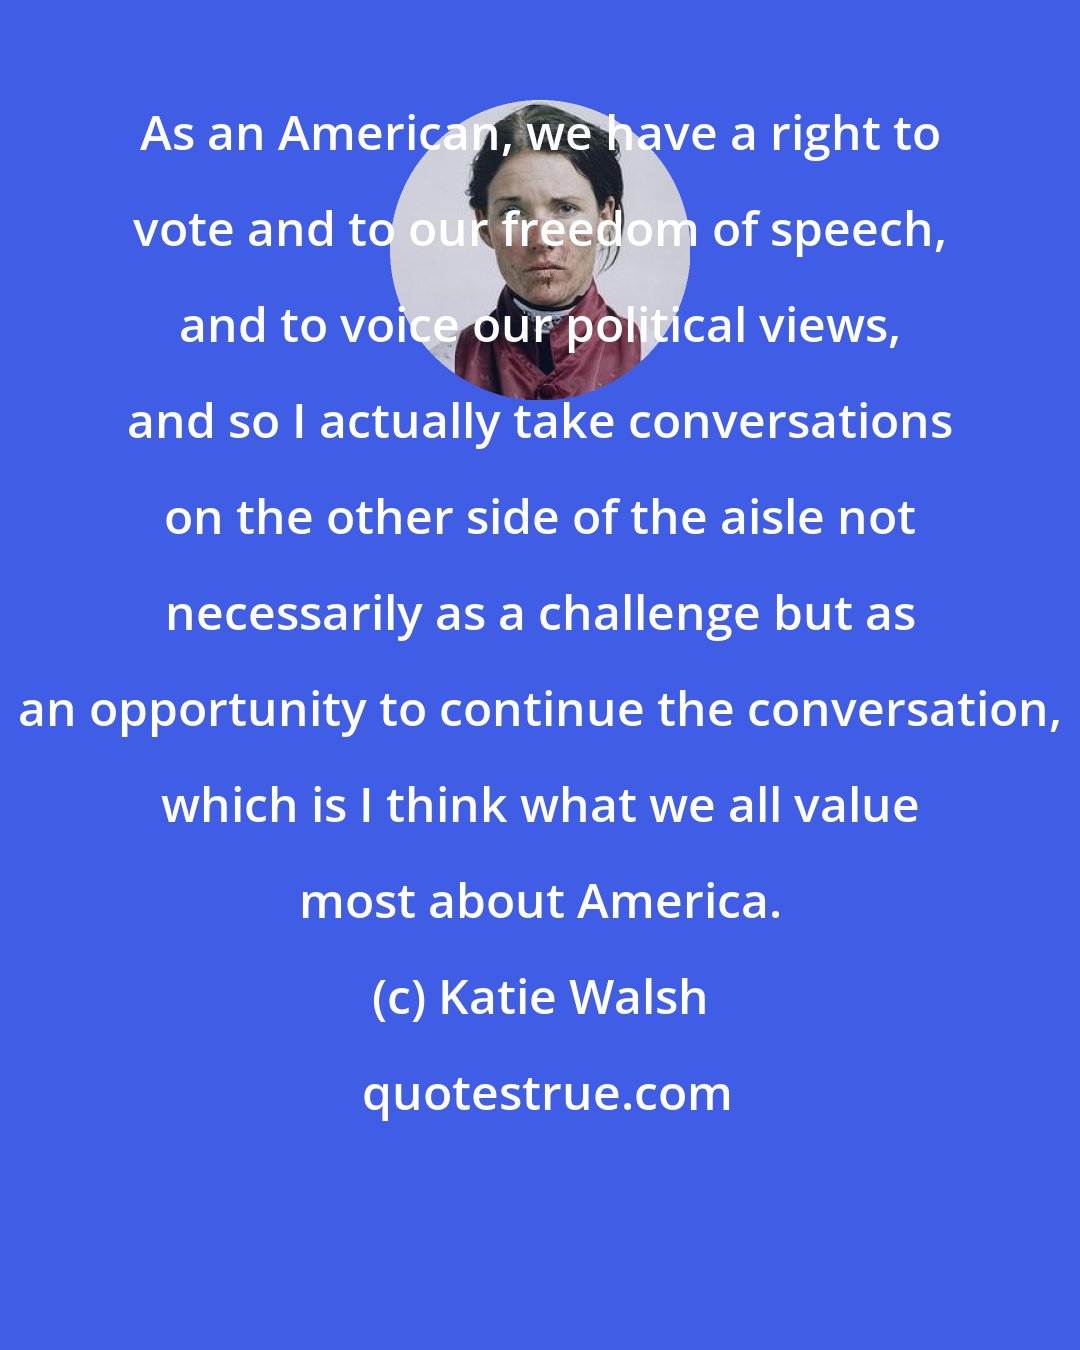 Katie Walsh: As an American, we have a right to vote and to our freedom of speech, and to voice our political views, and so I actually take conversations on the other side of the aisle not necessarily as a challenge but as an opportunity to continue the conversation, which is I think what we all value most about America.